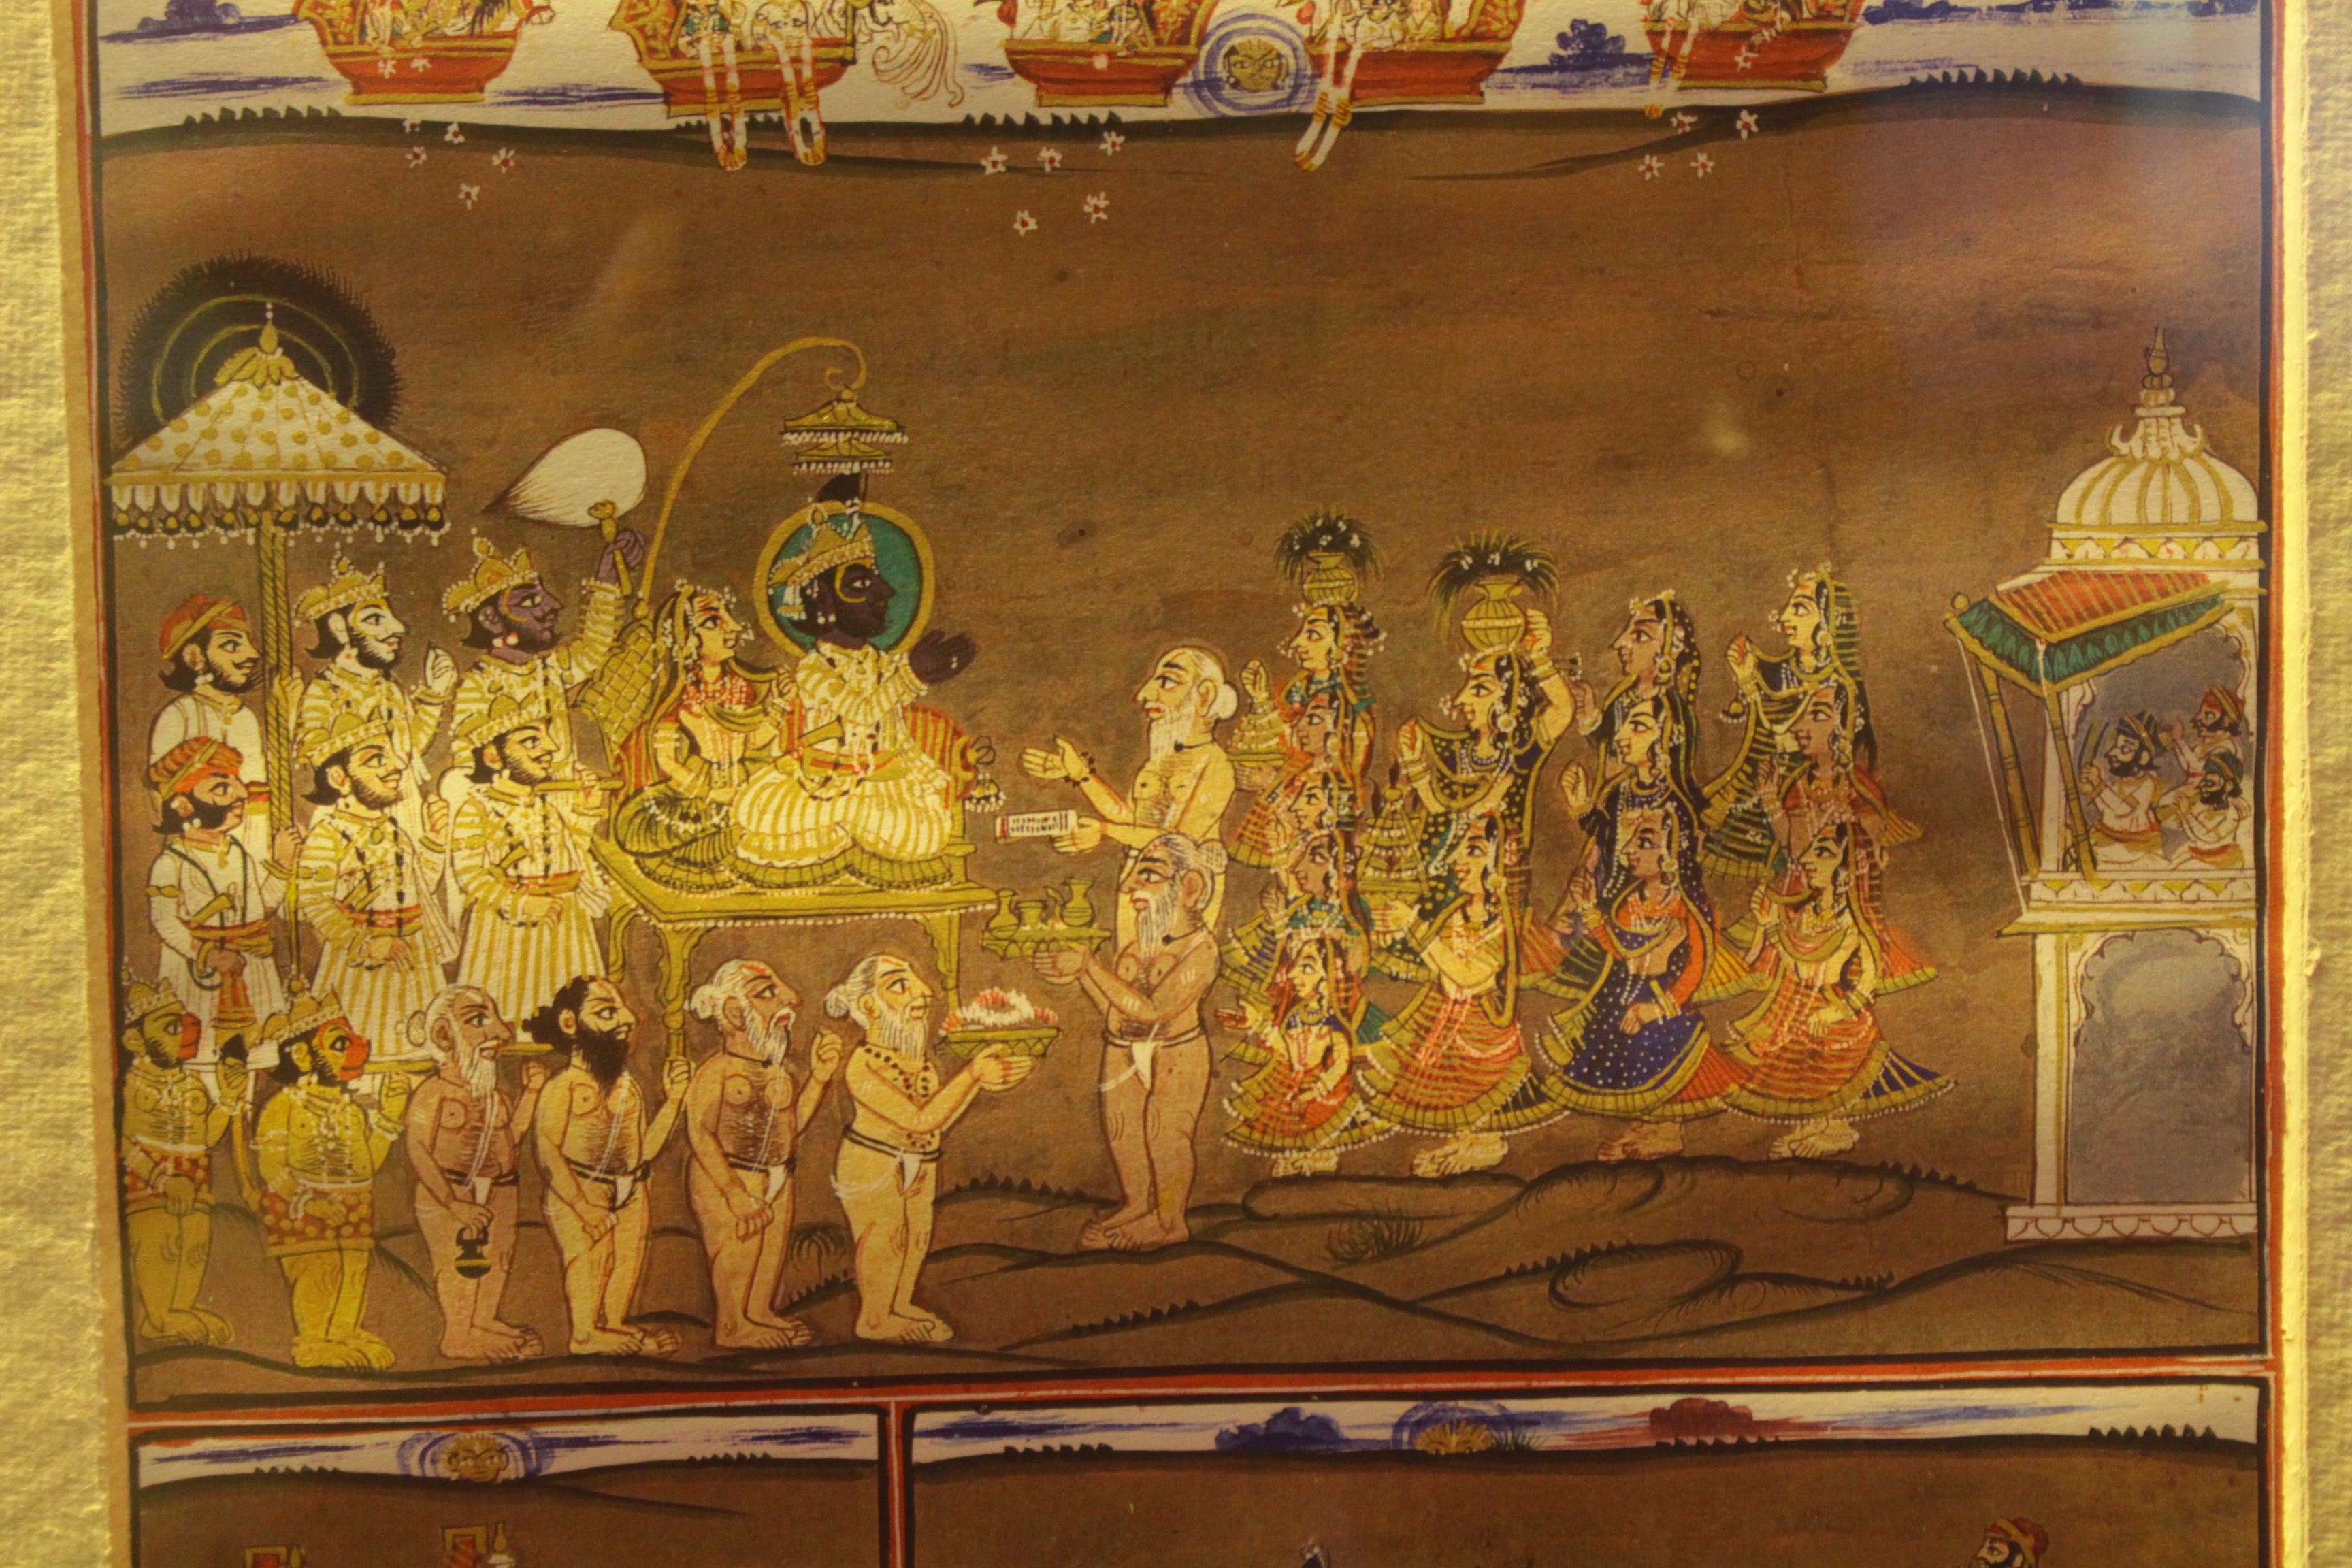 rare pictures of lord Rama preserved in Jodhpur